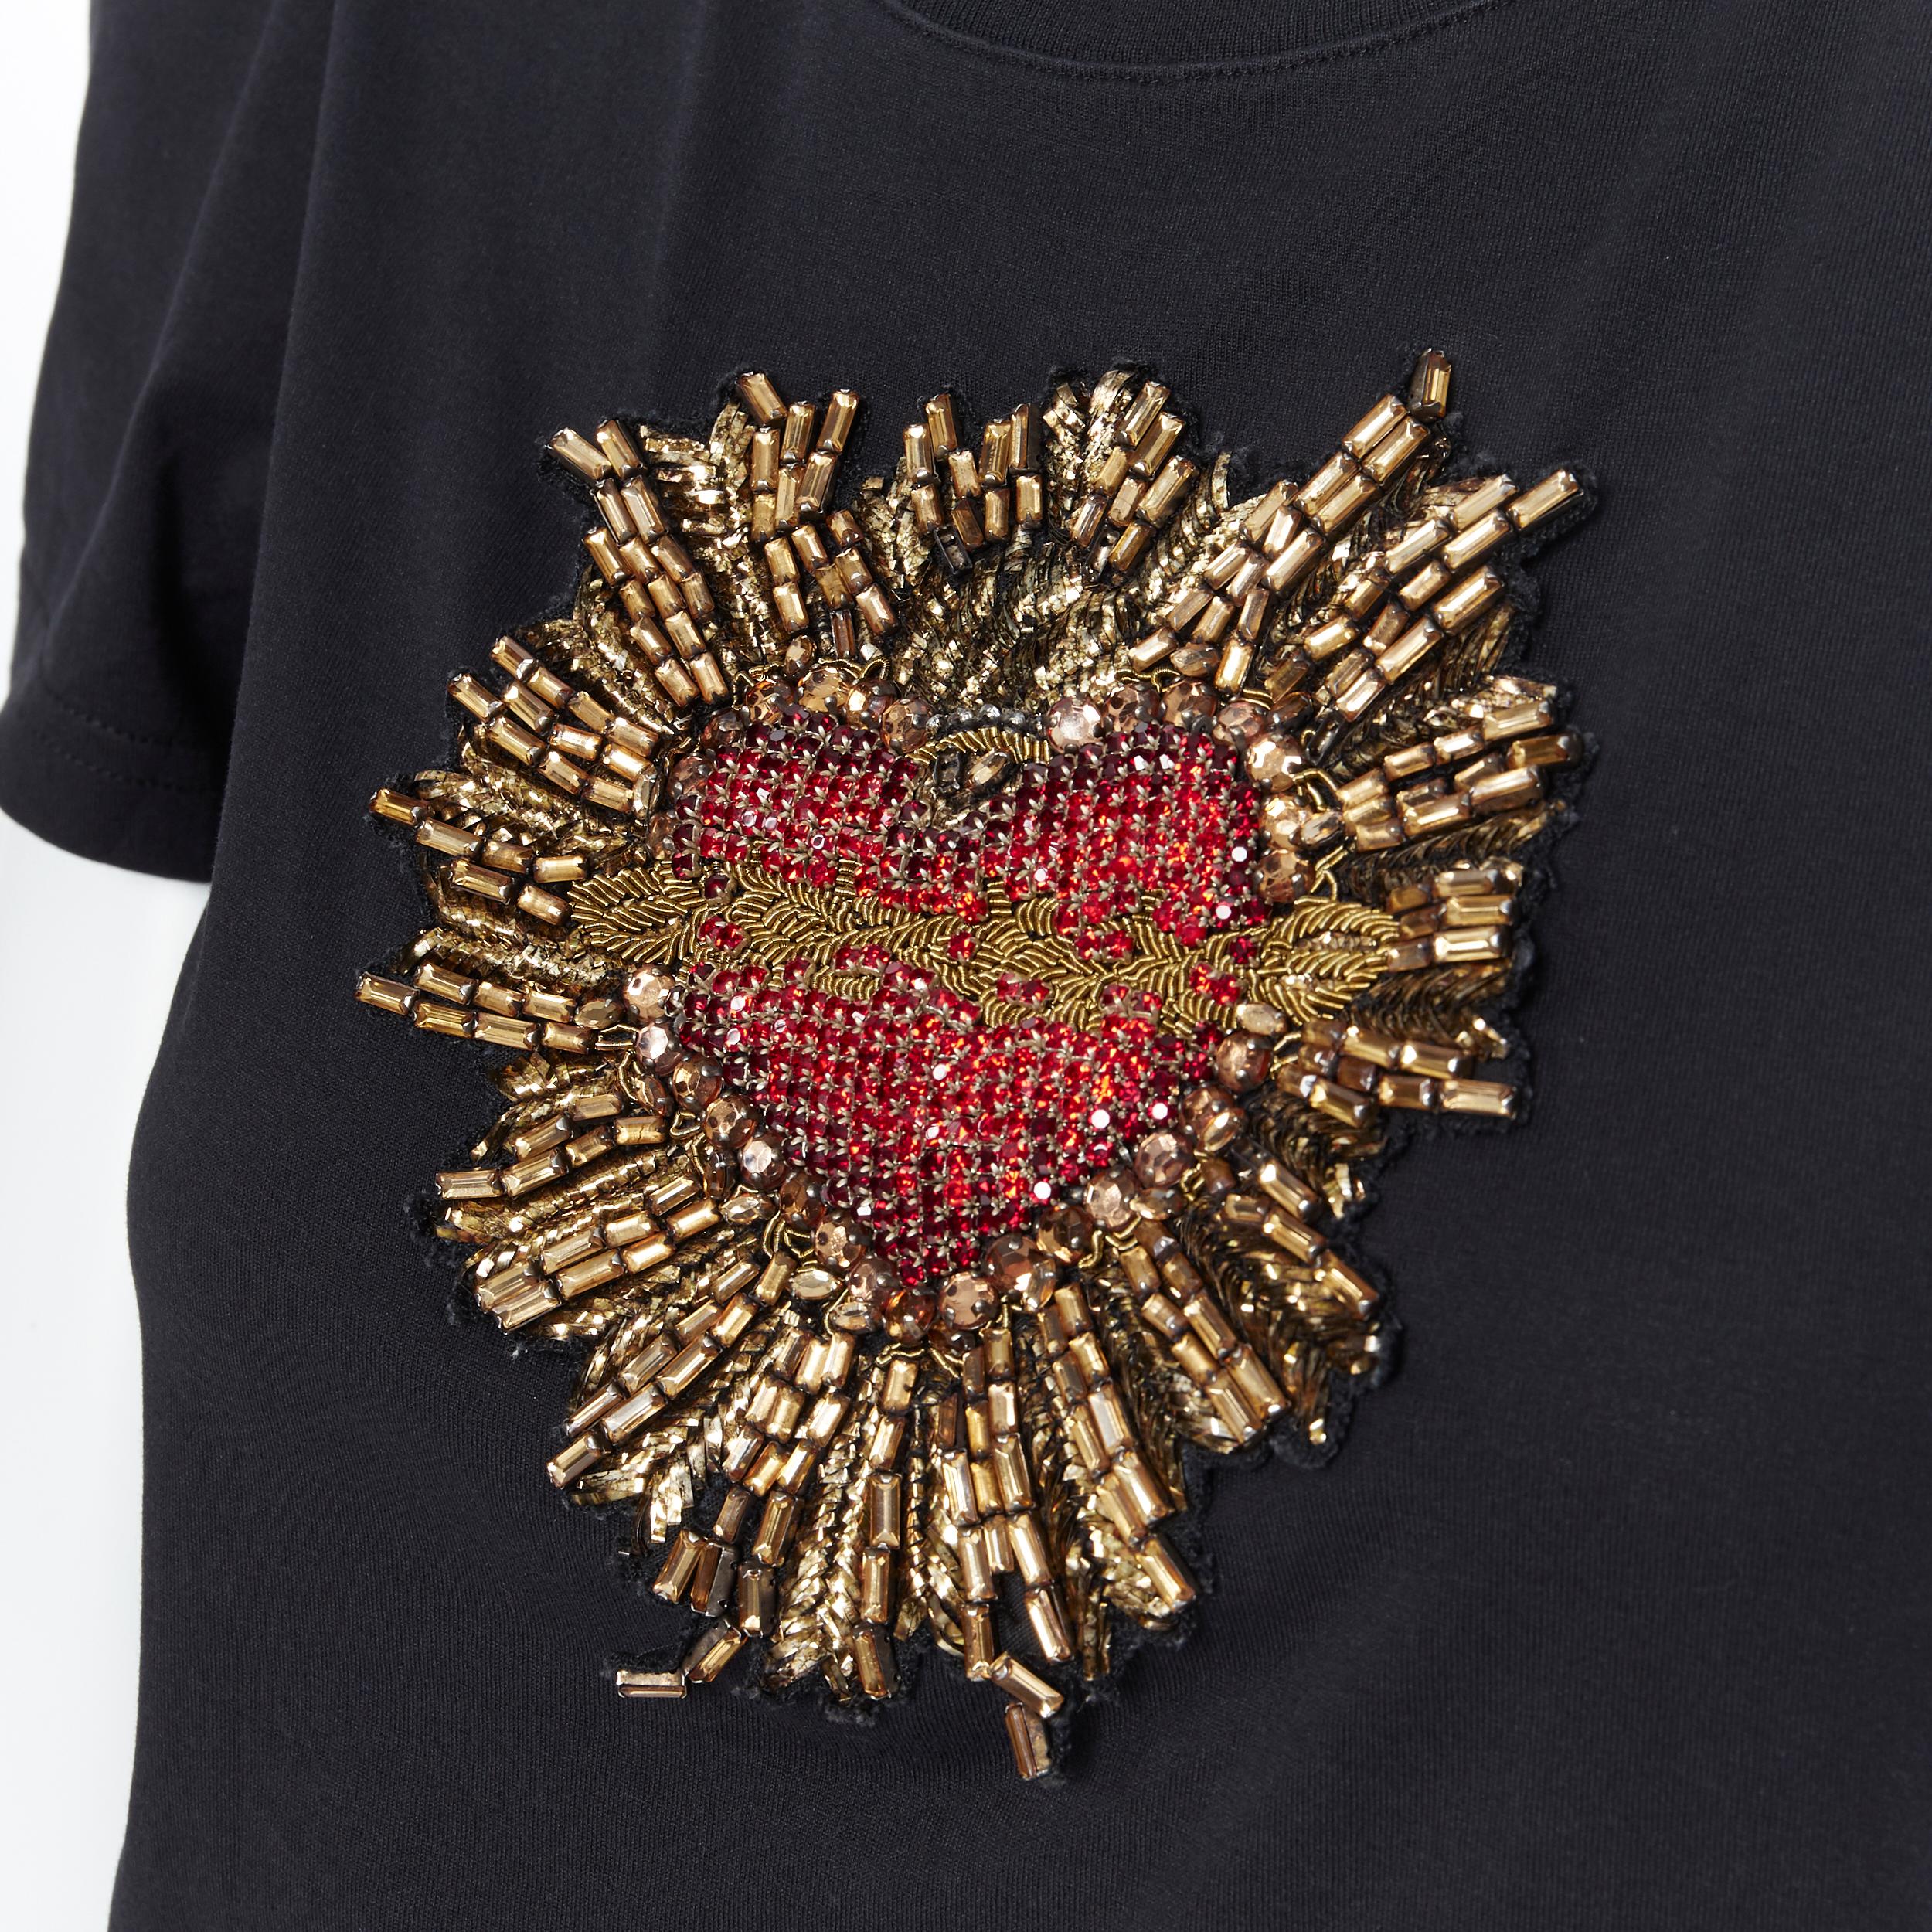 DOLCE GABBANA strass crystal bead embellished heart puff sleeve t-shirt IT40
Brand: Dolce Gabanna
Model Name / Style: T-shirt
Material: Cotton
Color: Black
Pattern: Solid
Extra Detail: Intricate gold and crystal beaded heart.
Made in: